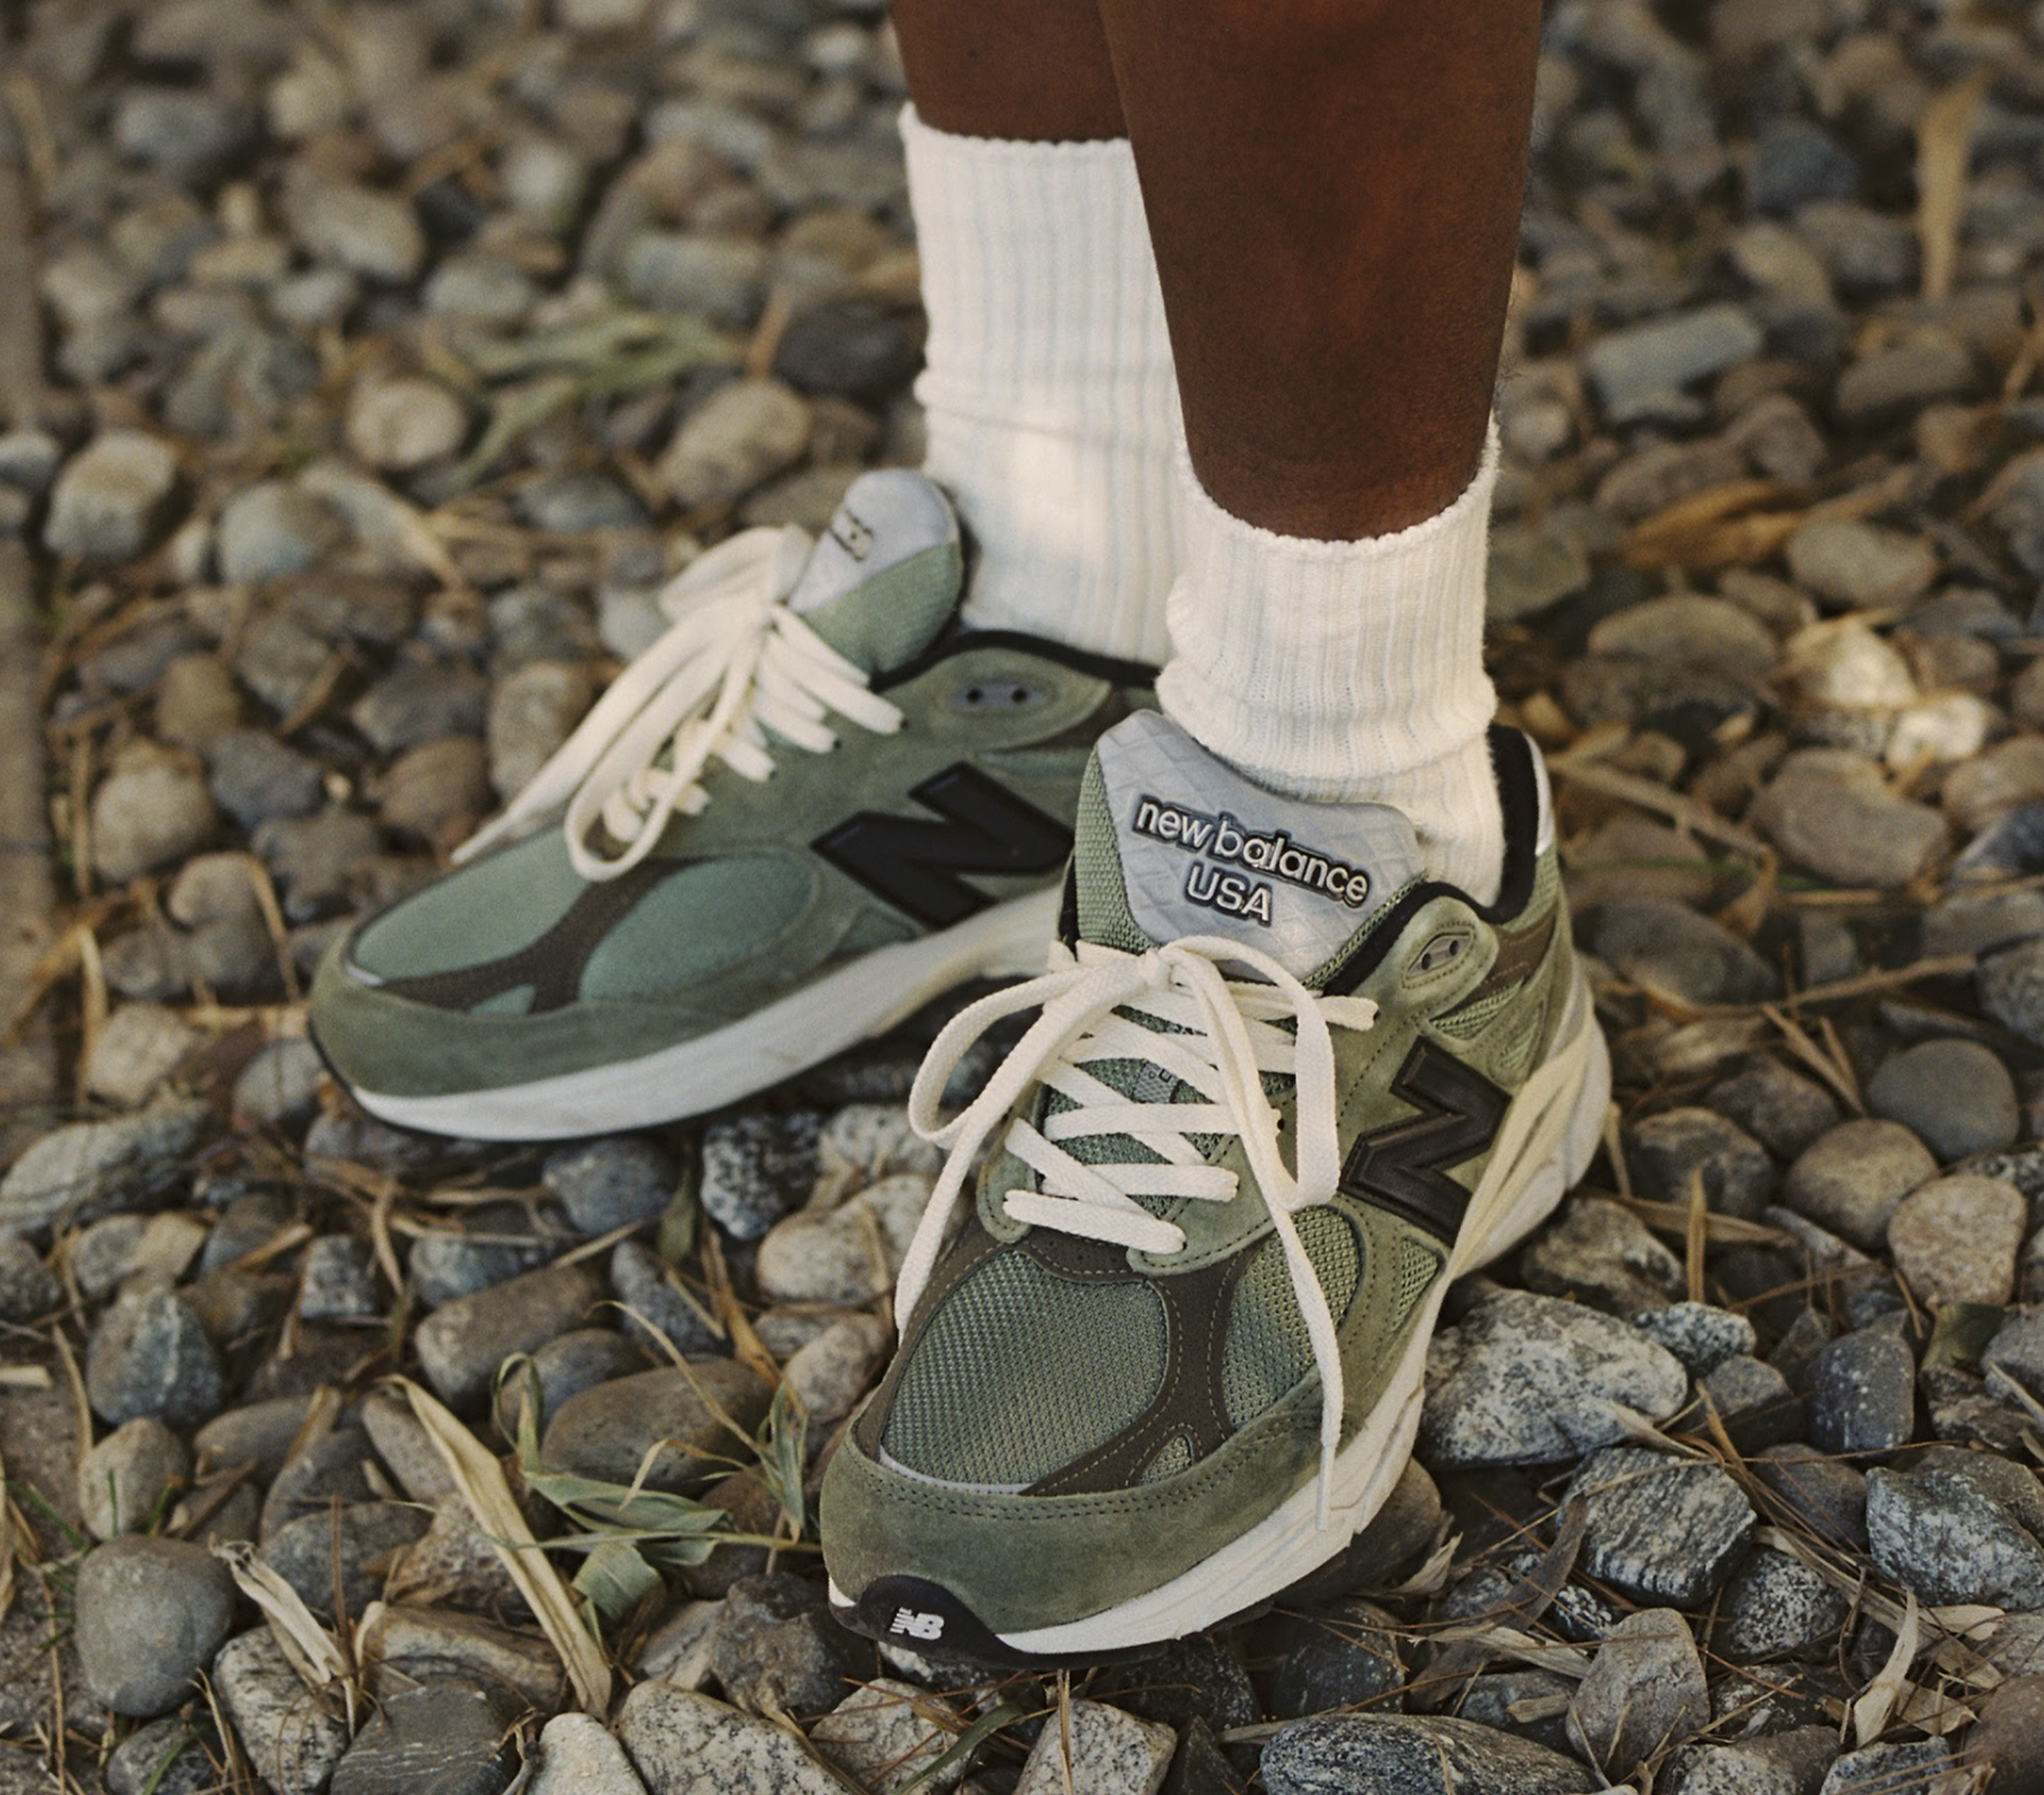 JJJJound's 'Olive' New Balance 990v3 Collab Is Releasing This Week